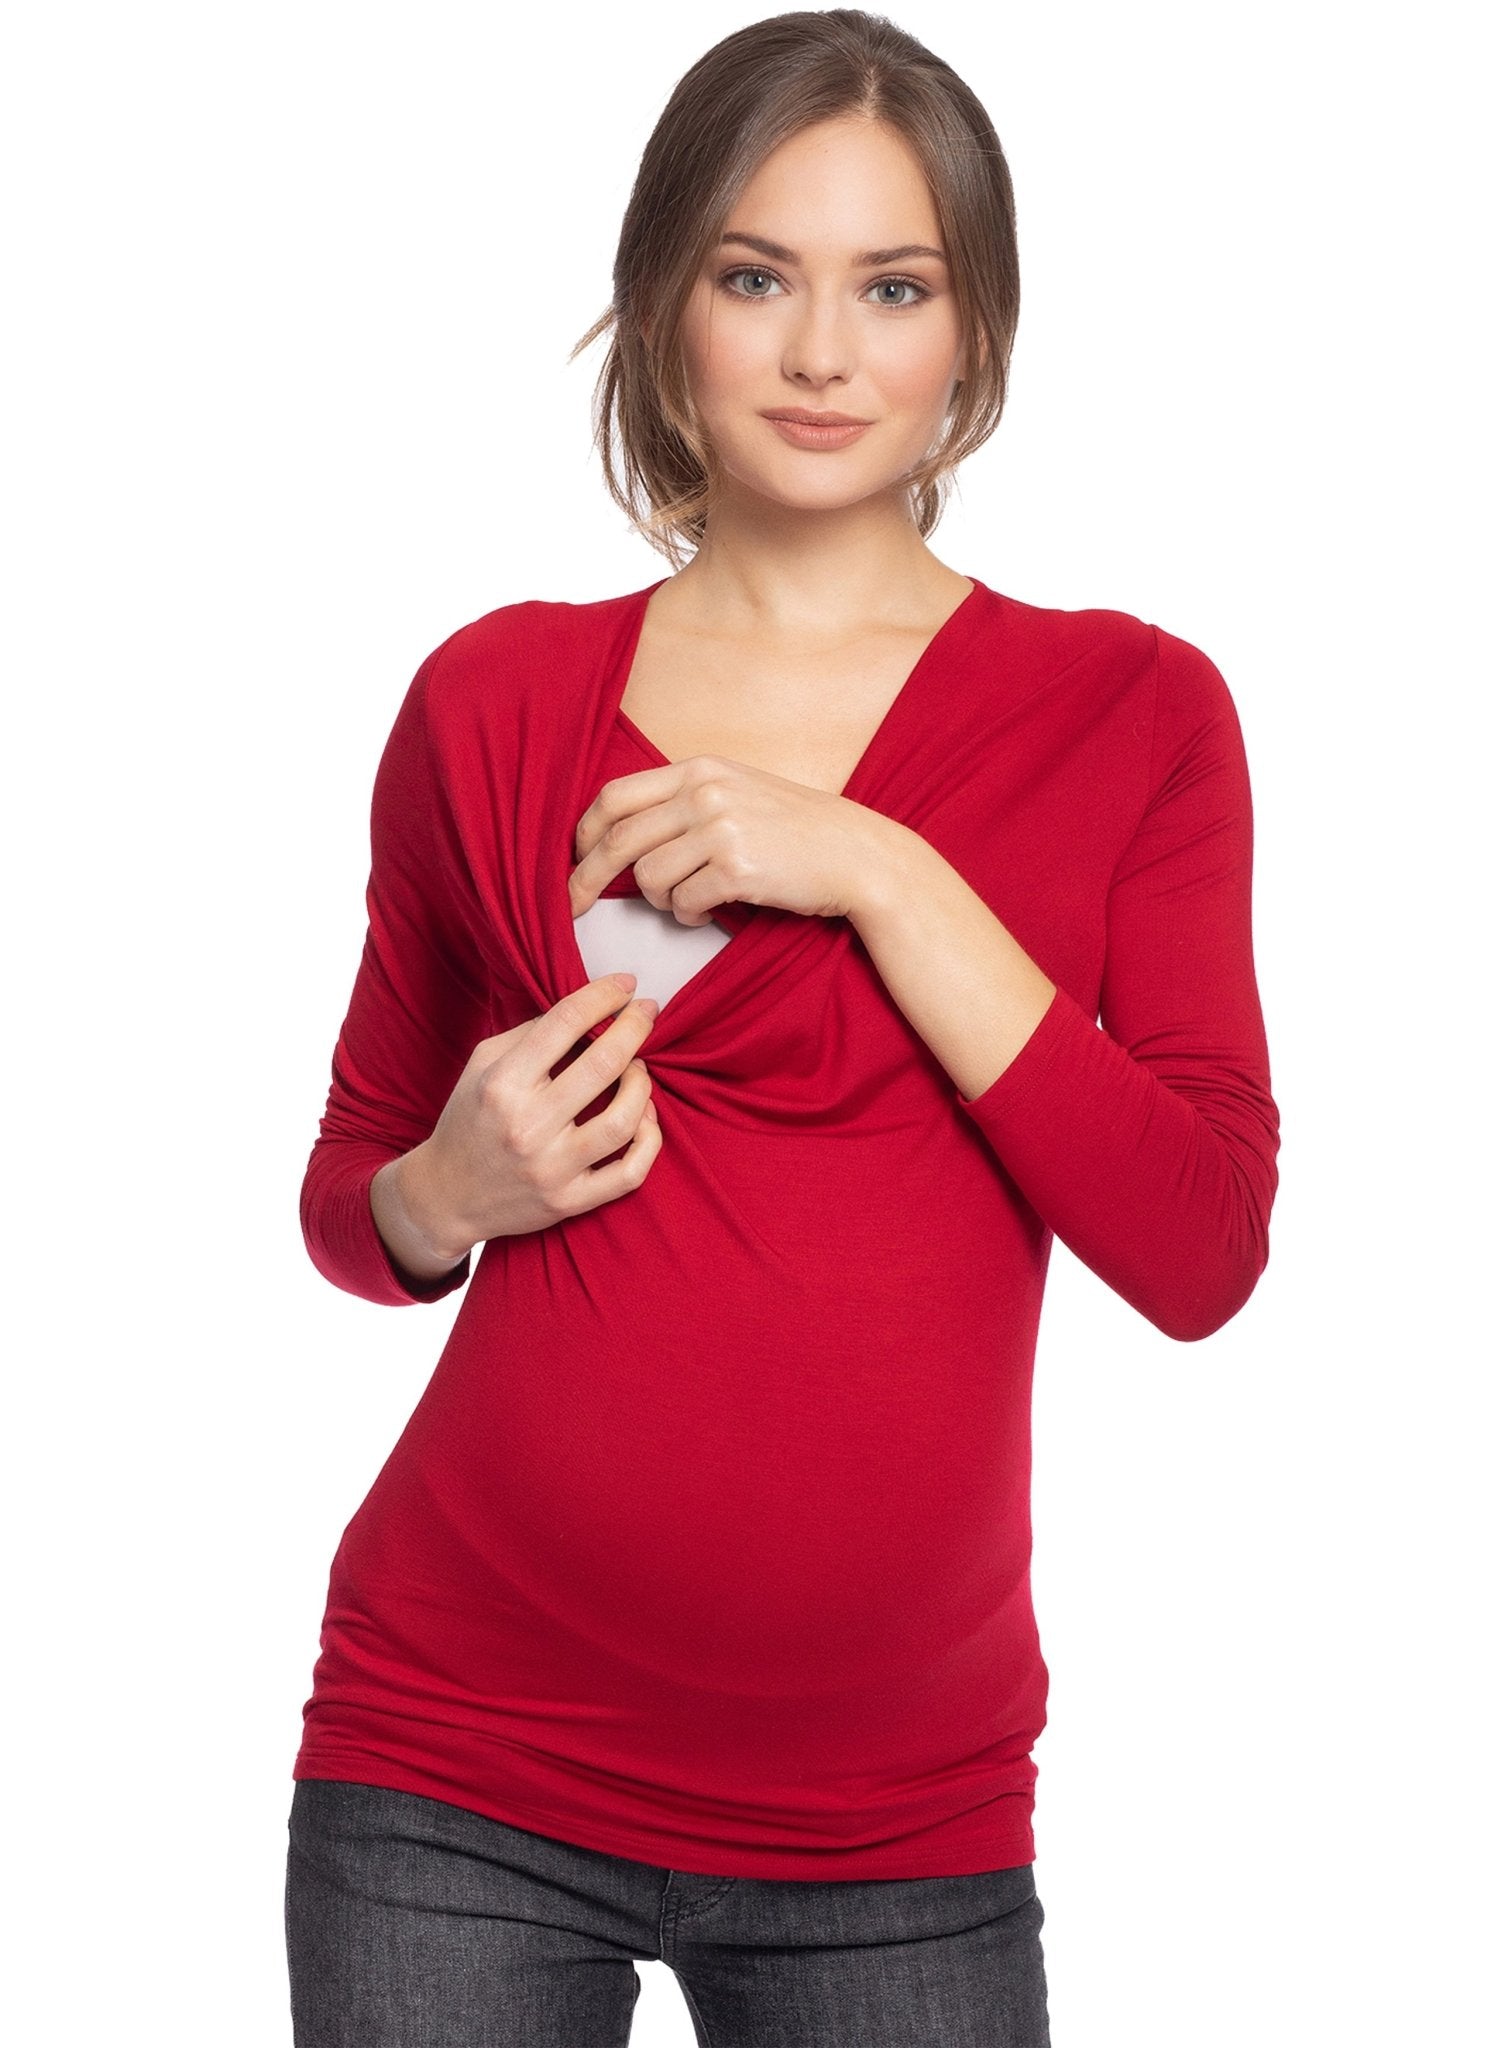 Ginestra Maternity & Nursing Top - Chillipepper - Mums and Bumps